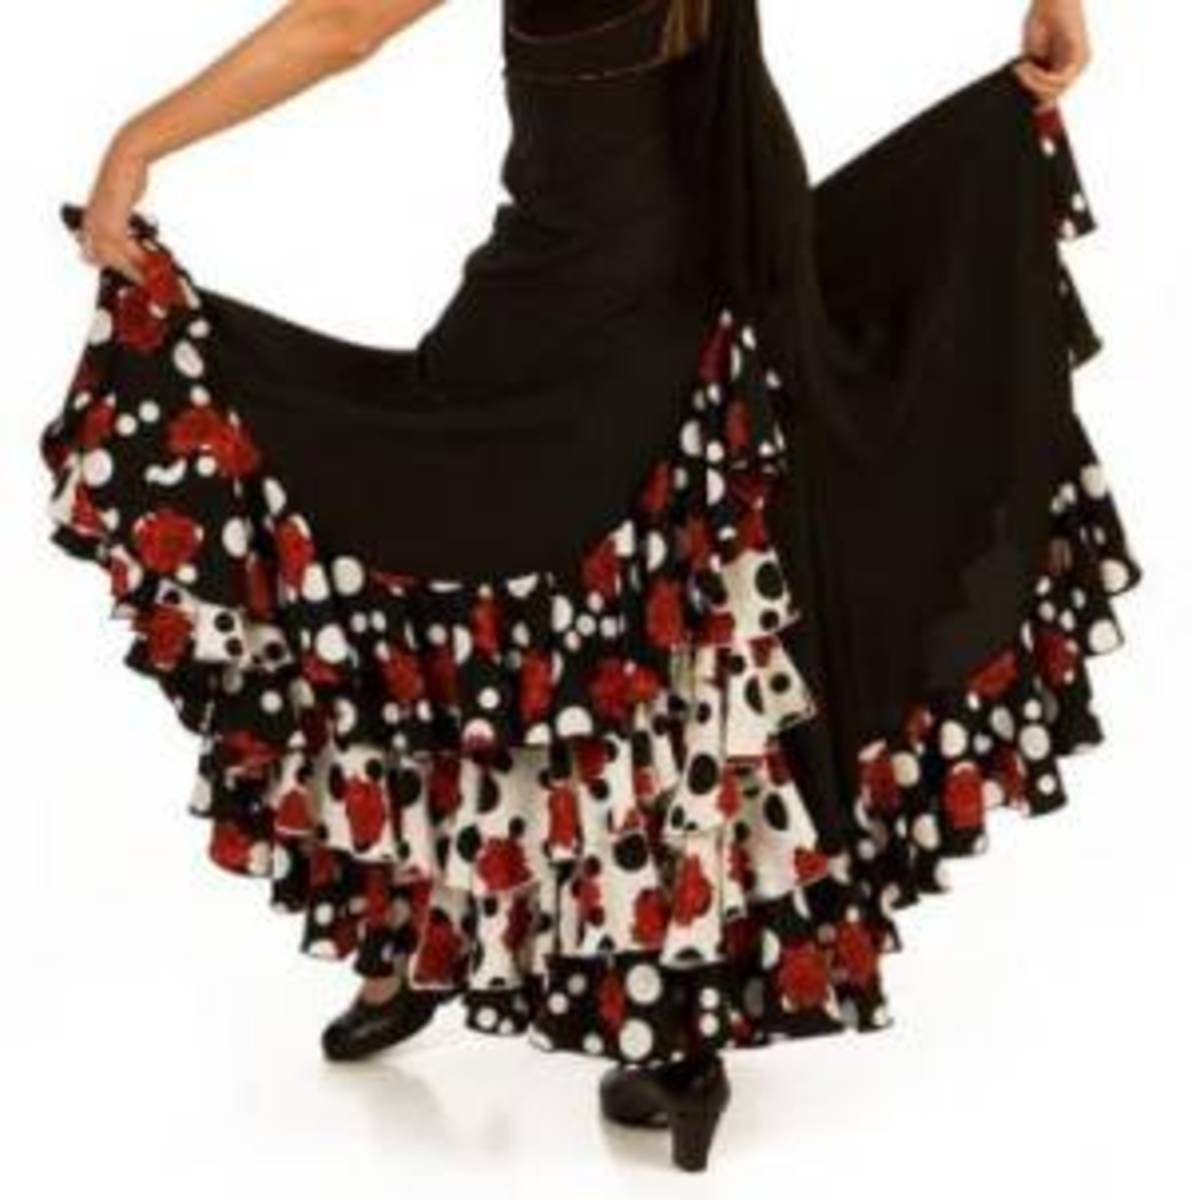 What is the history of flamenco dresses?